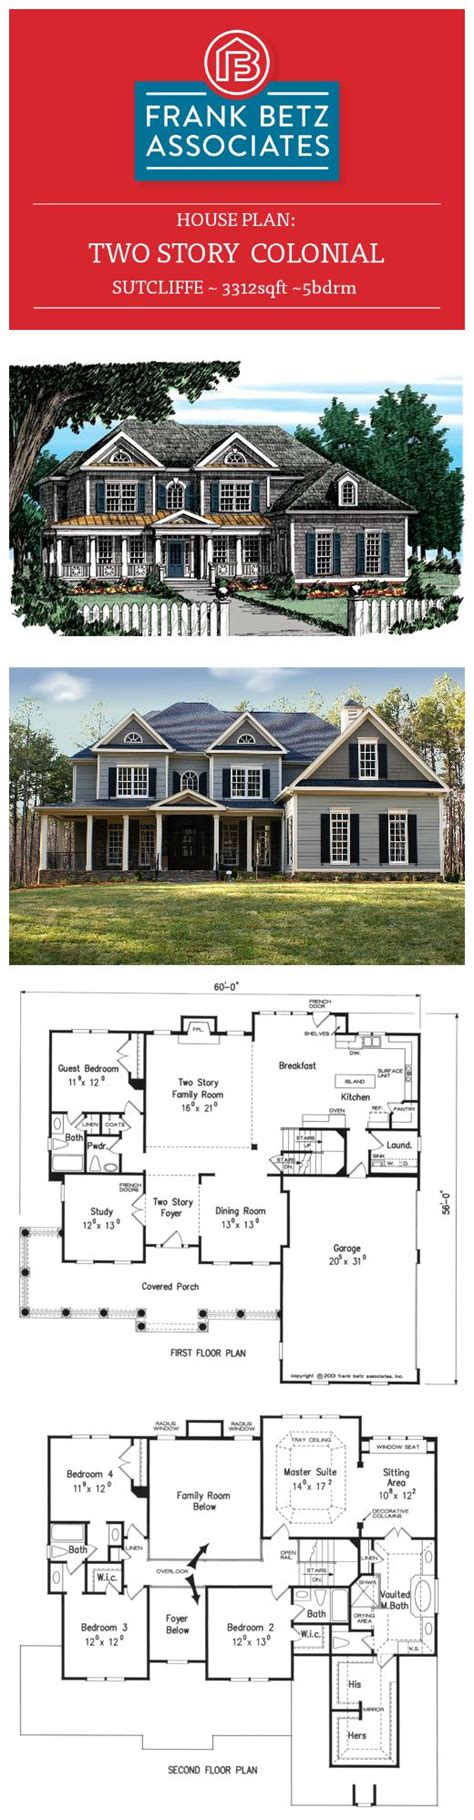 2 Story Colonial House Plans